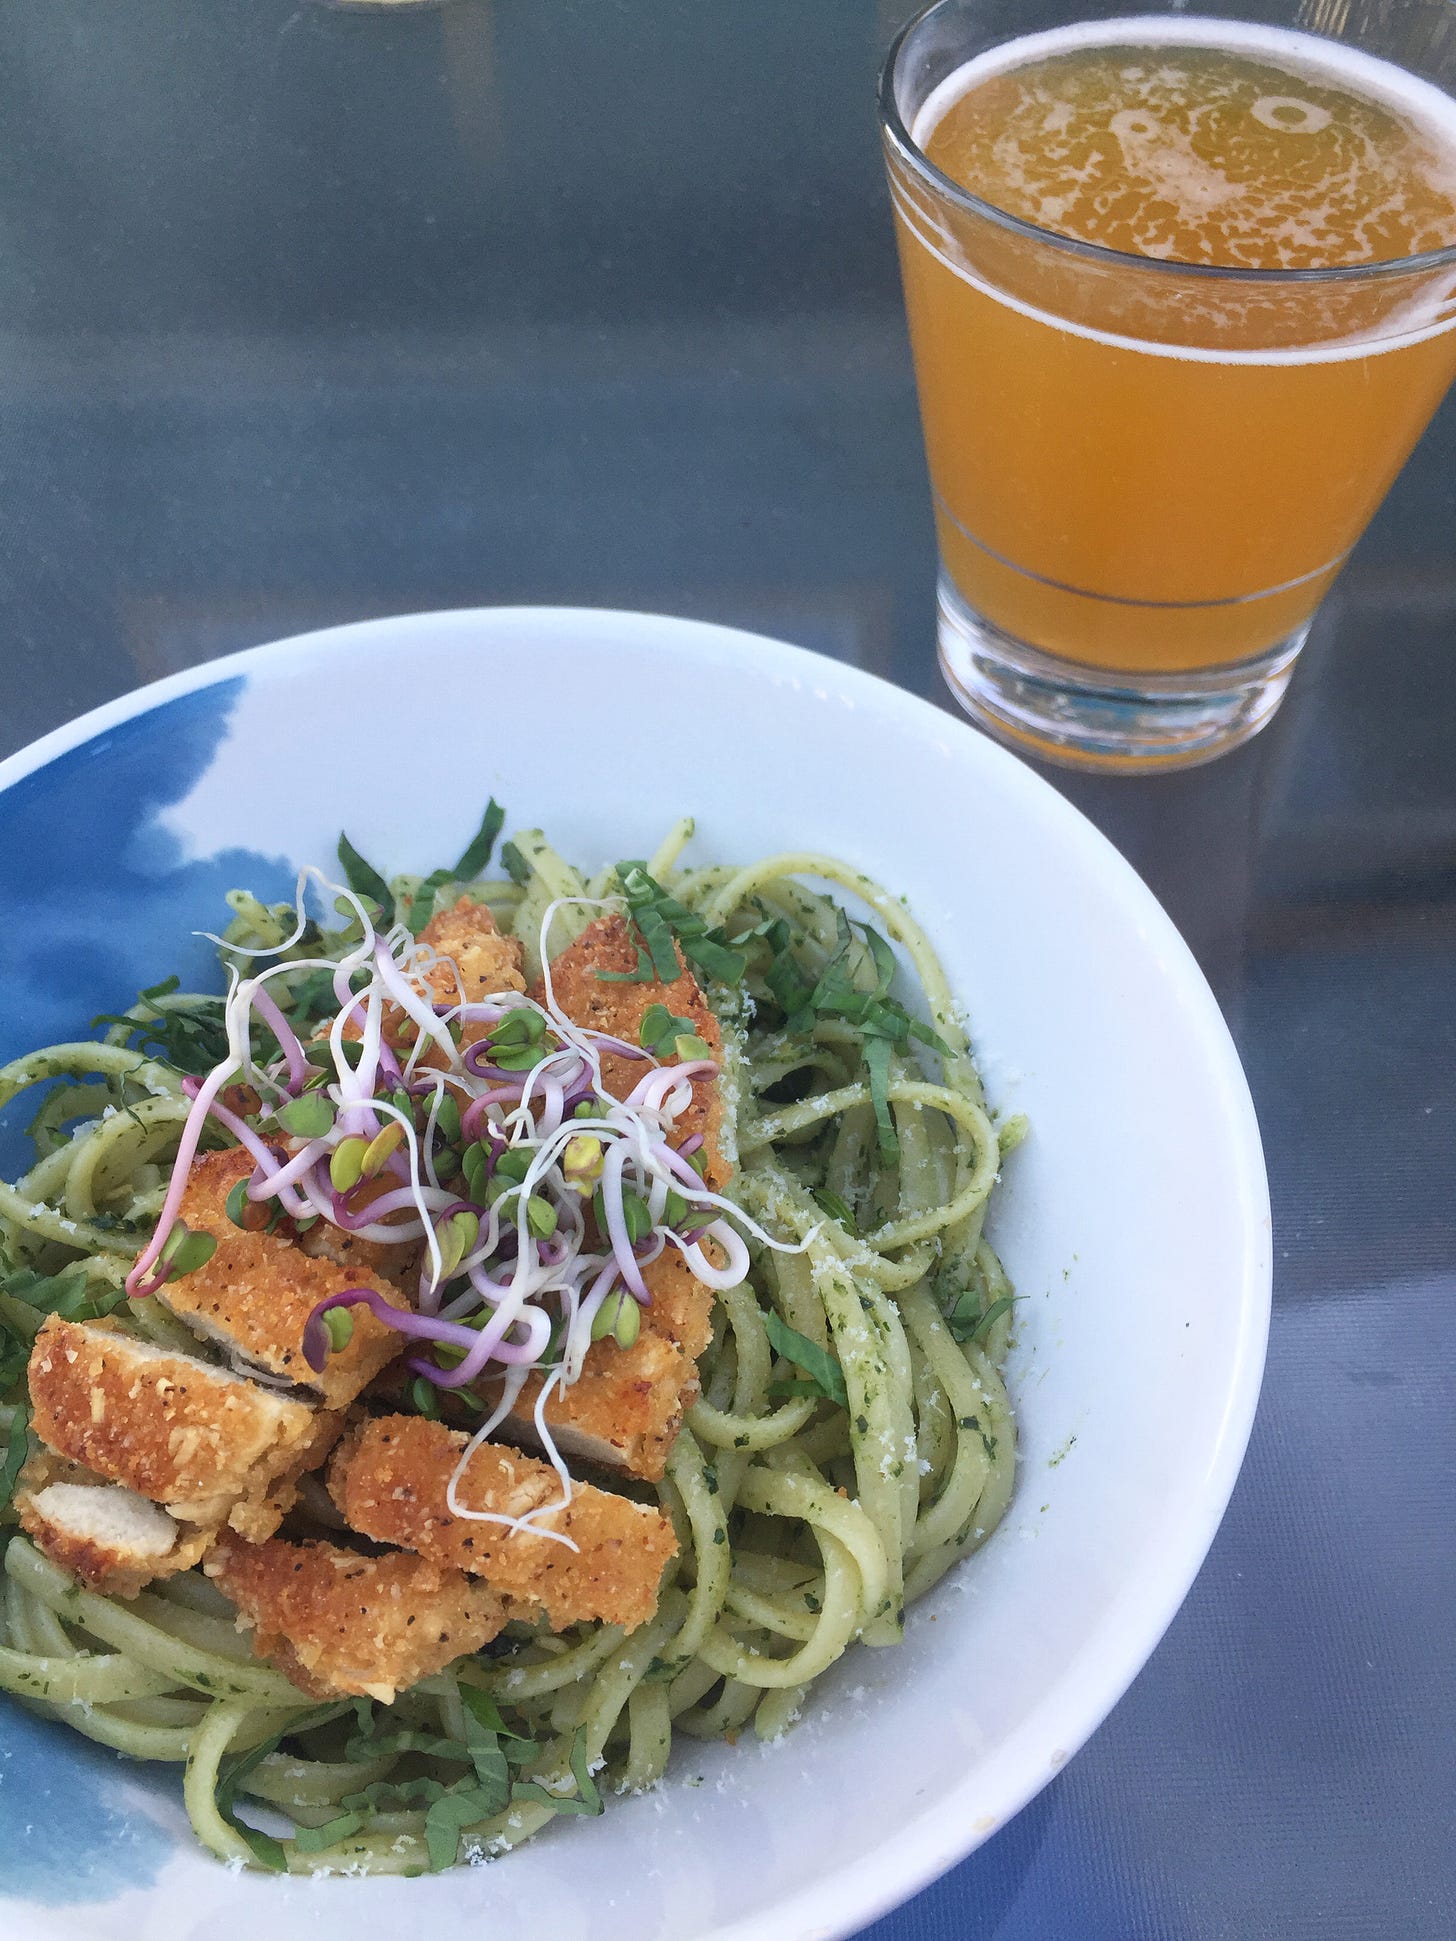 in the foreground, a bowl of linguine in pesto sauce with ribbons of basil and sliced chick'n tenders on top, radish sprouts resting in the centre. a glass of pale beer sits in the background.